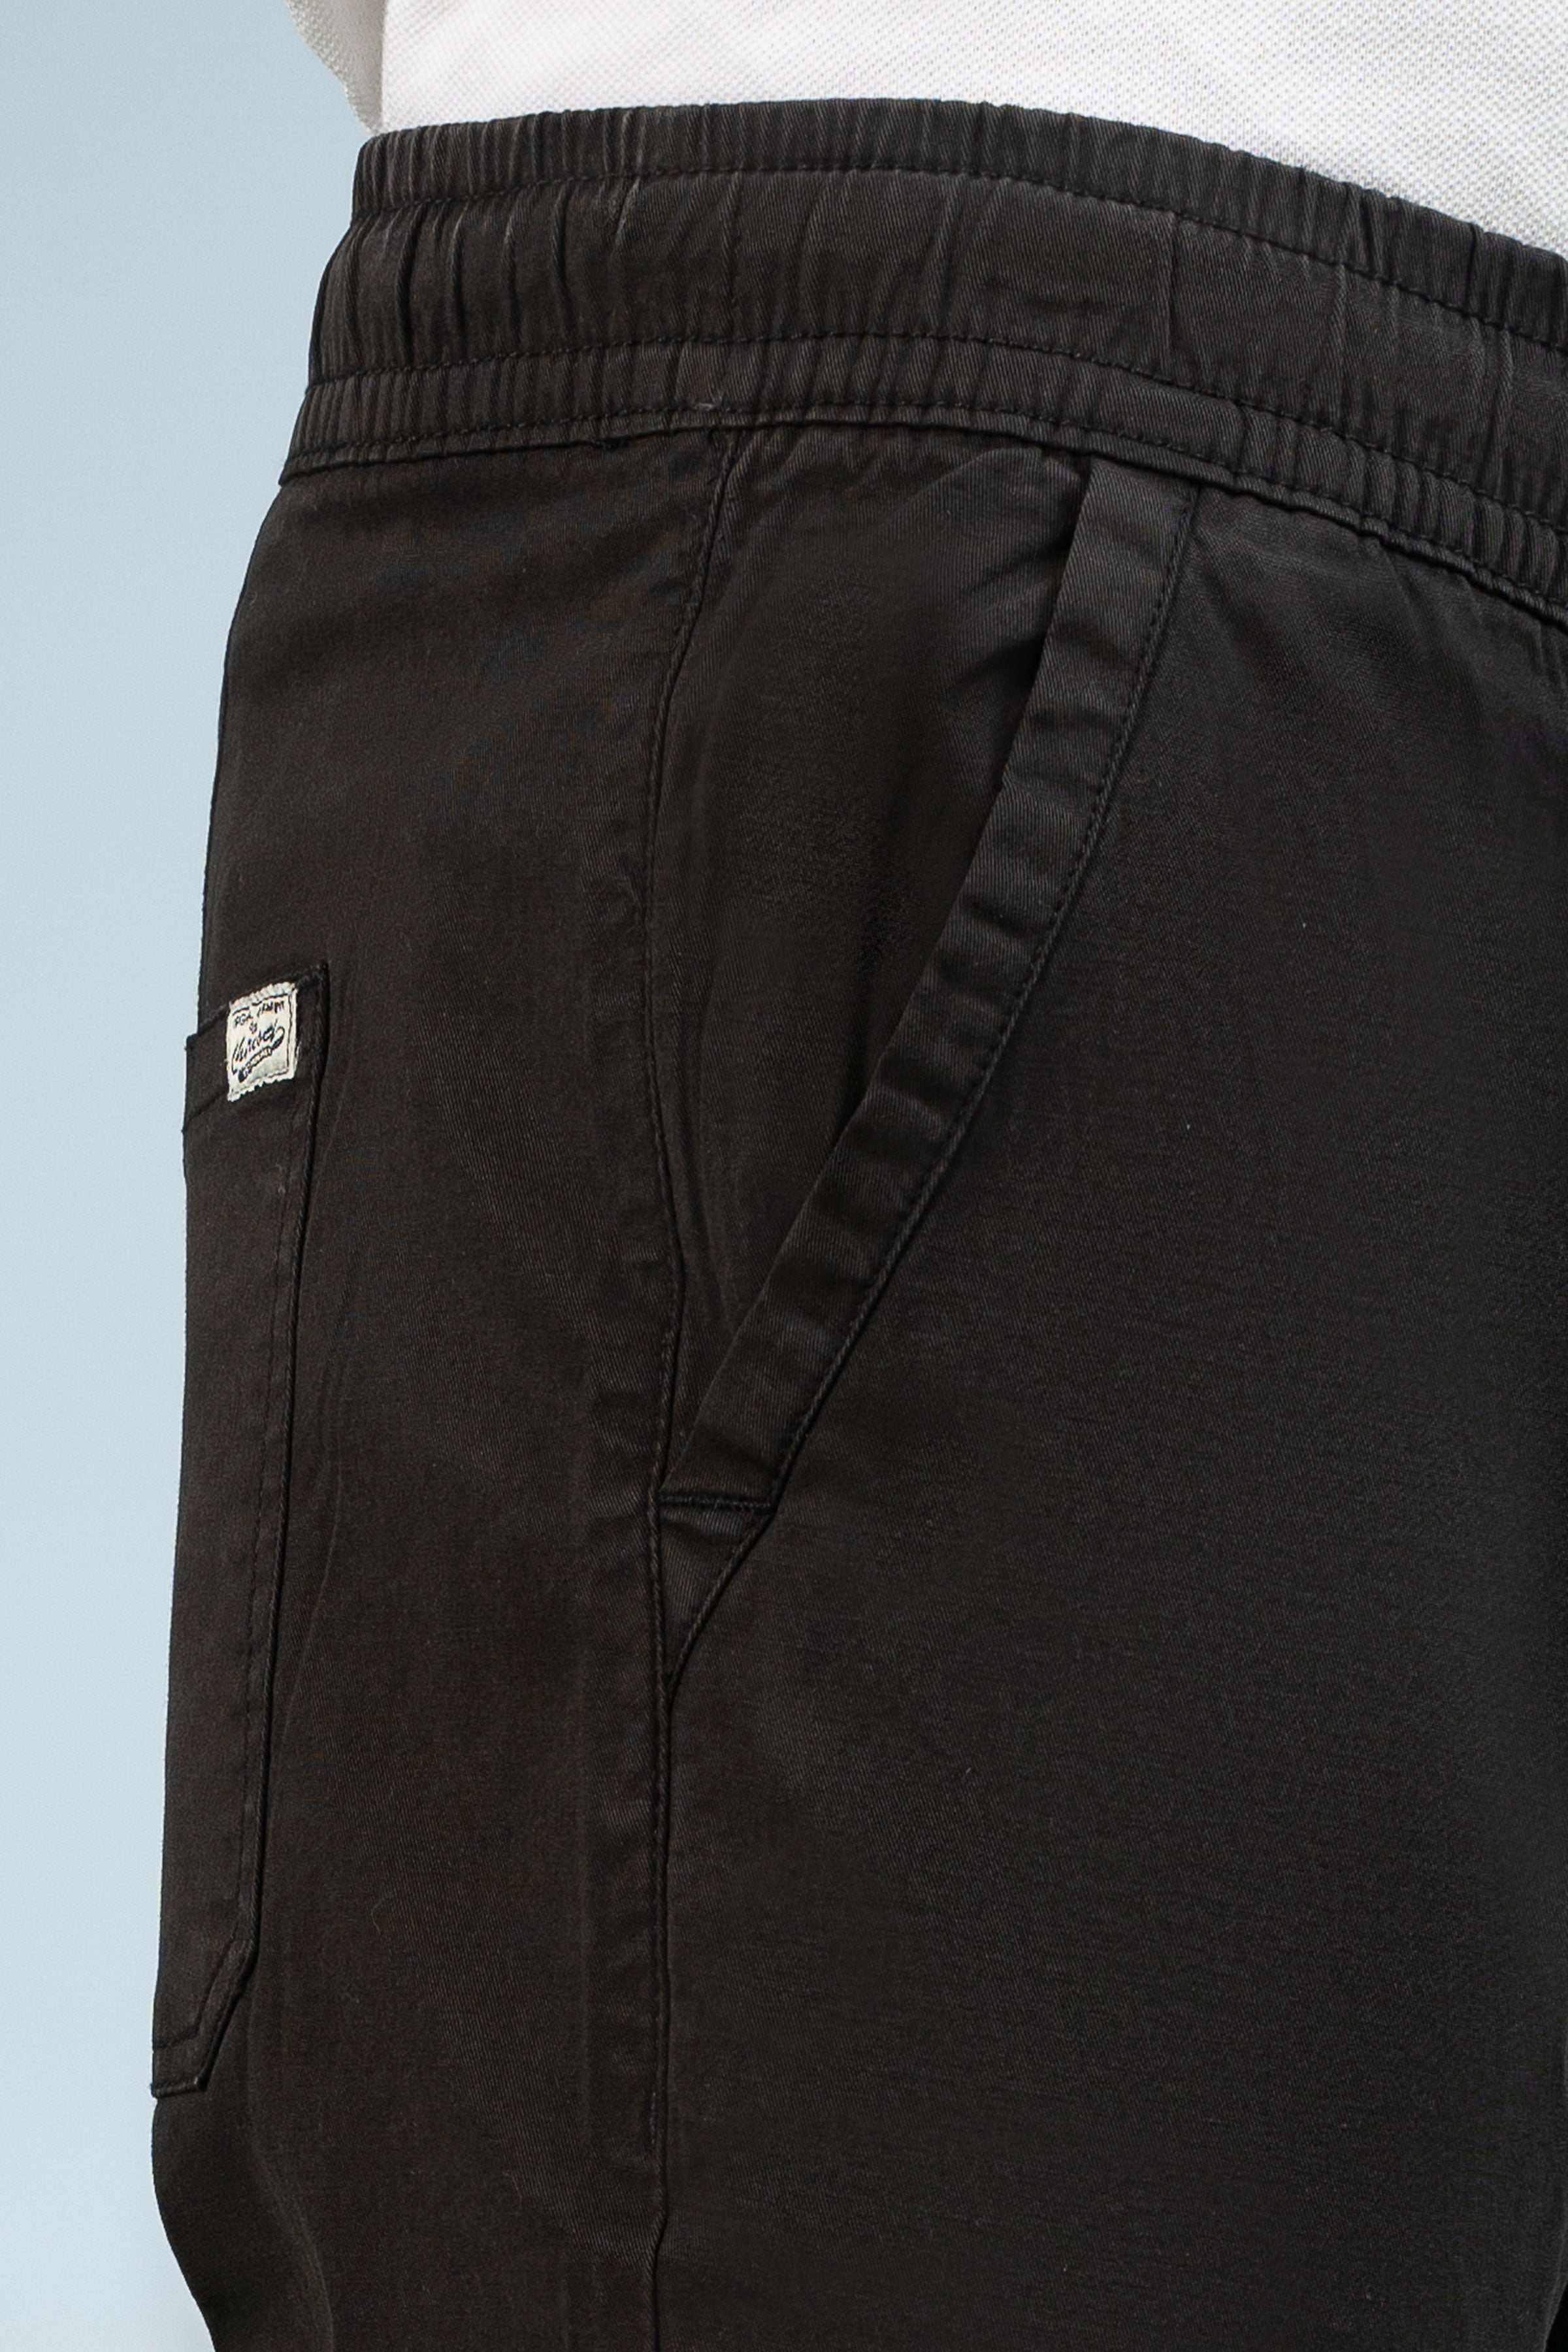 CASUAL JOGGER WAIST TROUSER BLACK - Charcoal Clothing